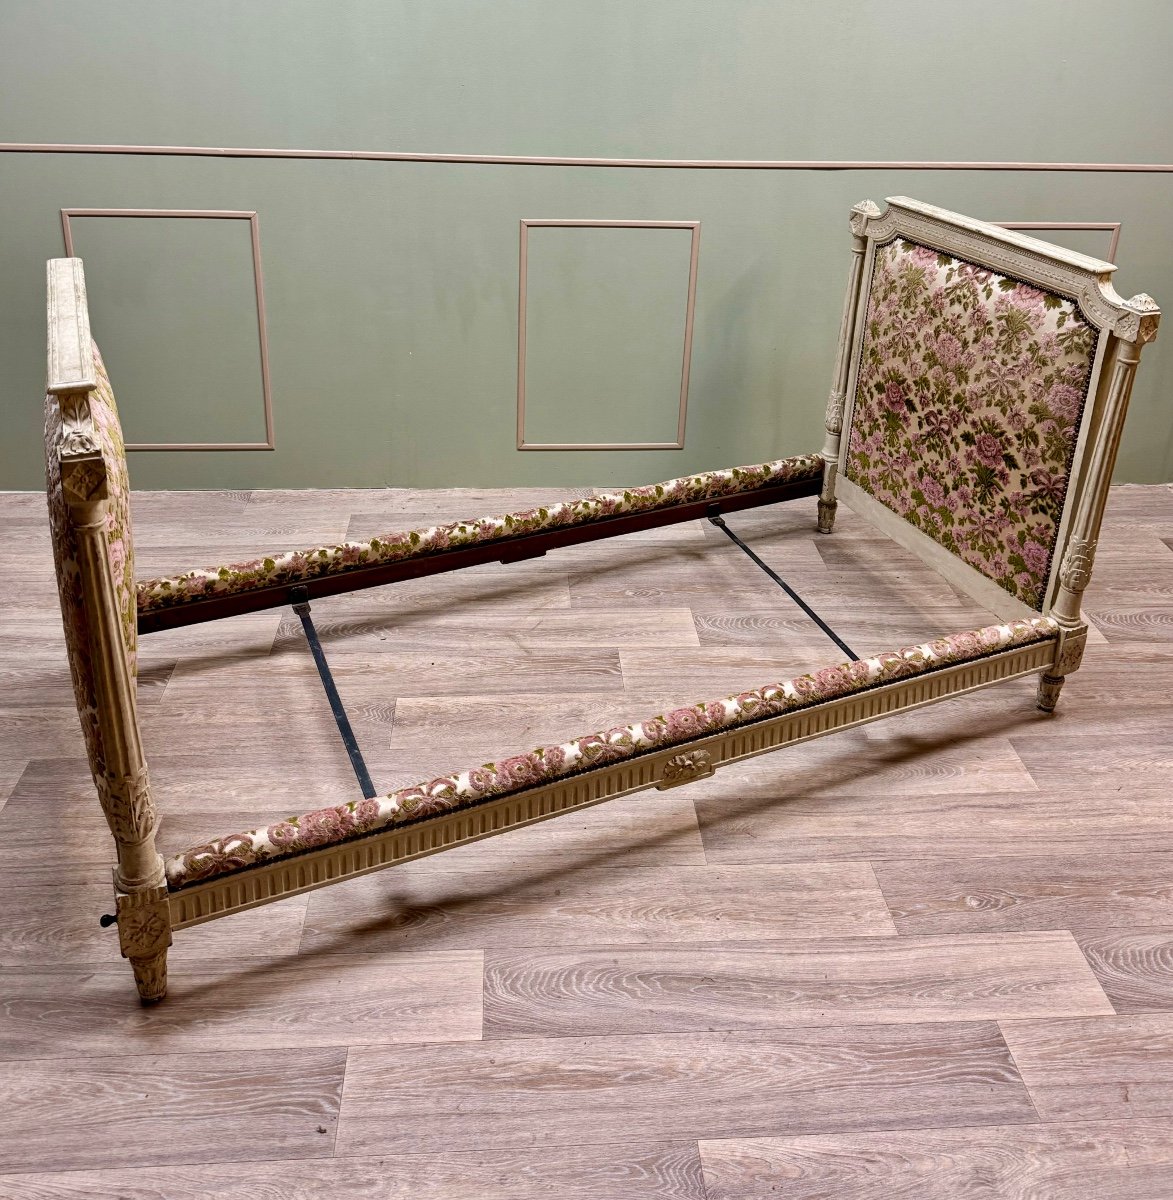 Georges Jacob Stamped Alcove Bed In Lacquered Wood From Louis XVI XVIII Eme Century -photo-3